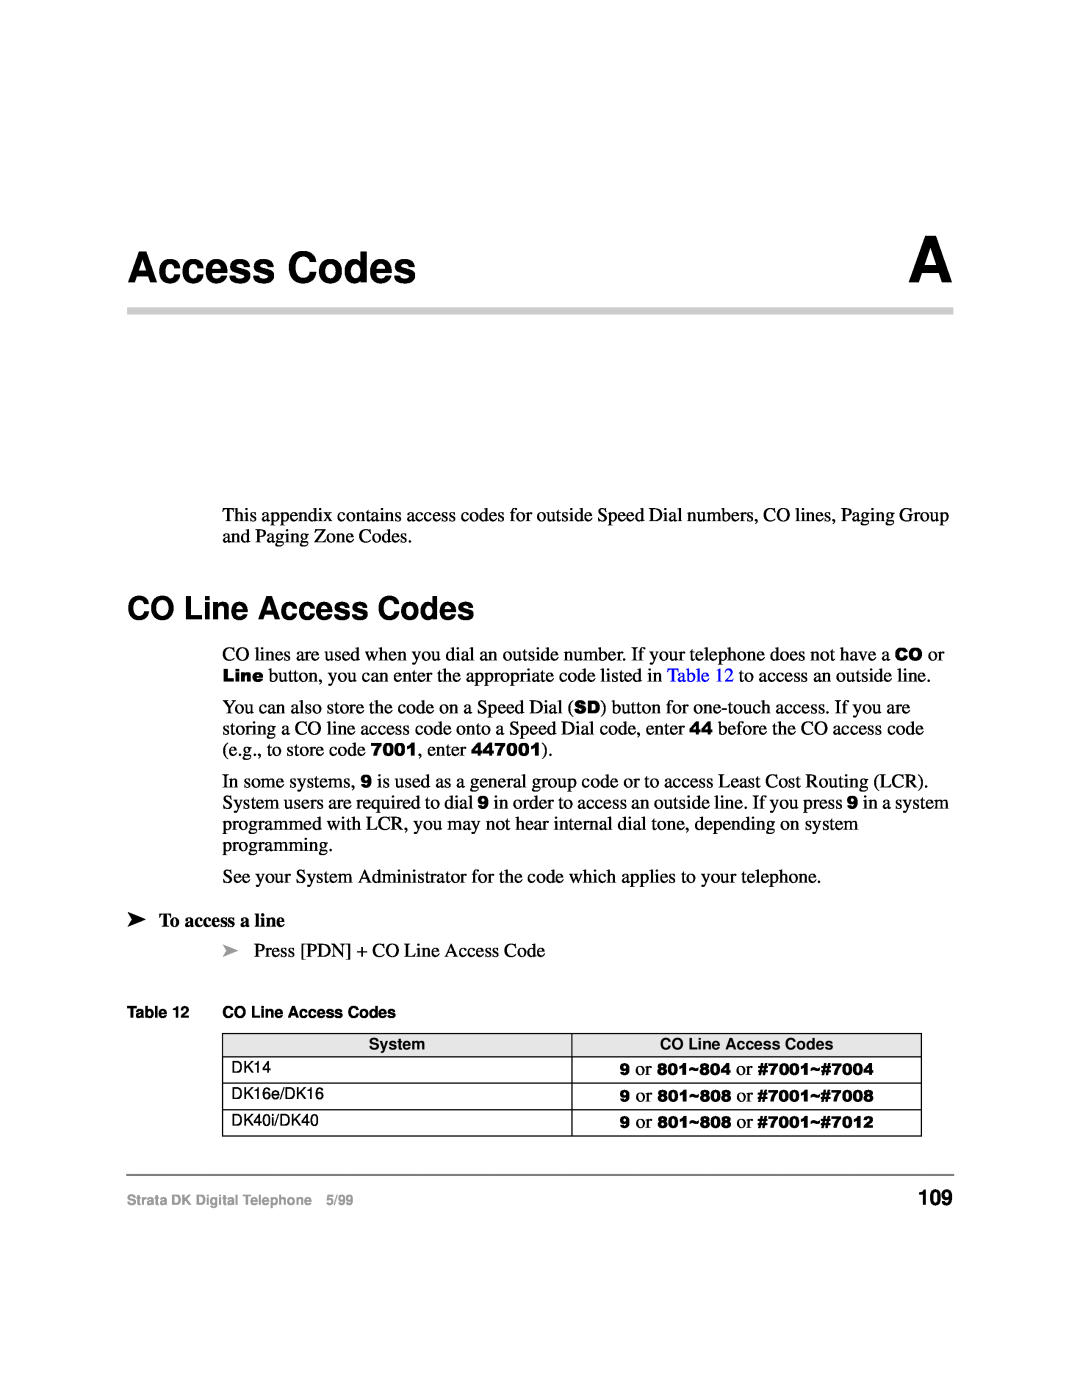 Toshiba CT manual CO Line Access Codes, To access a line 